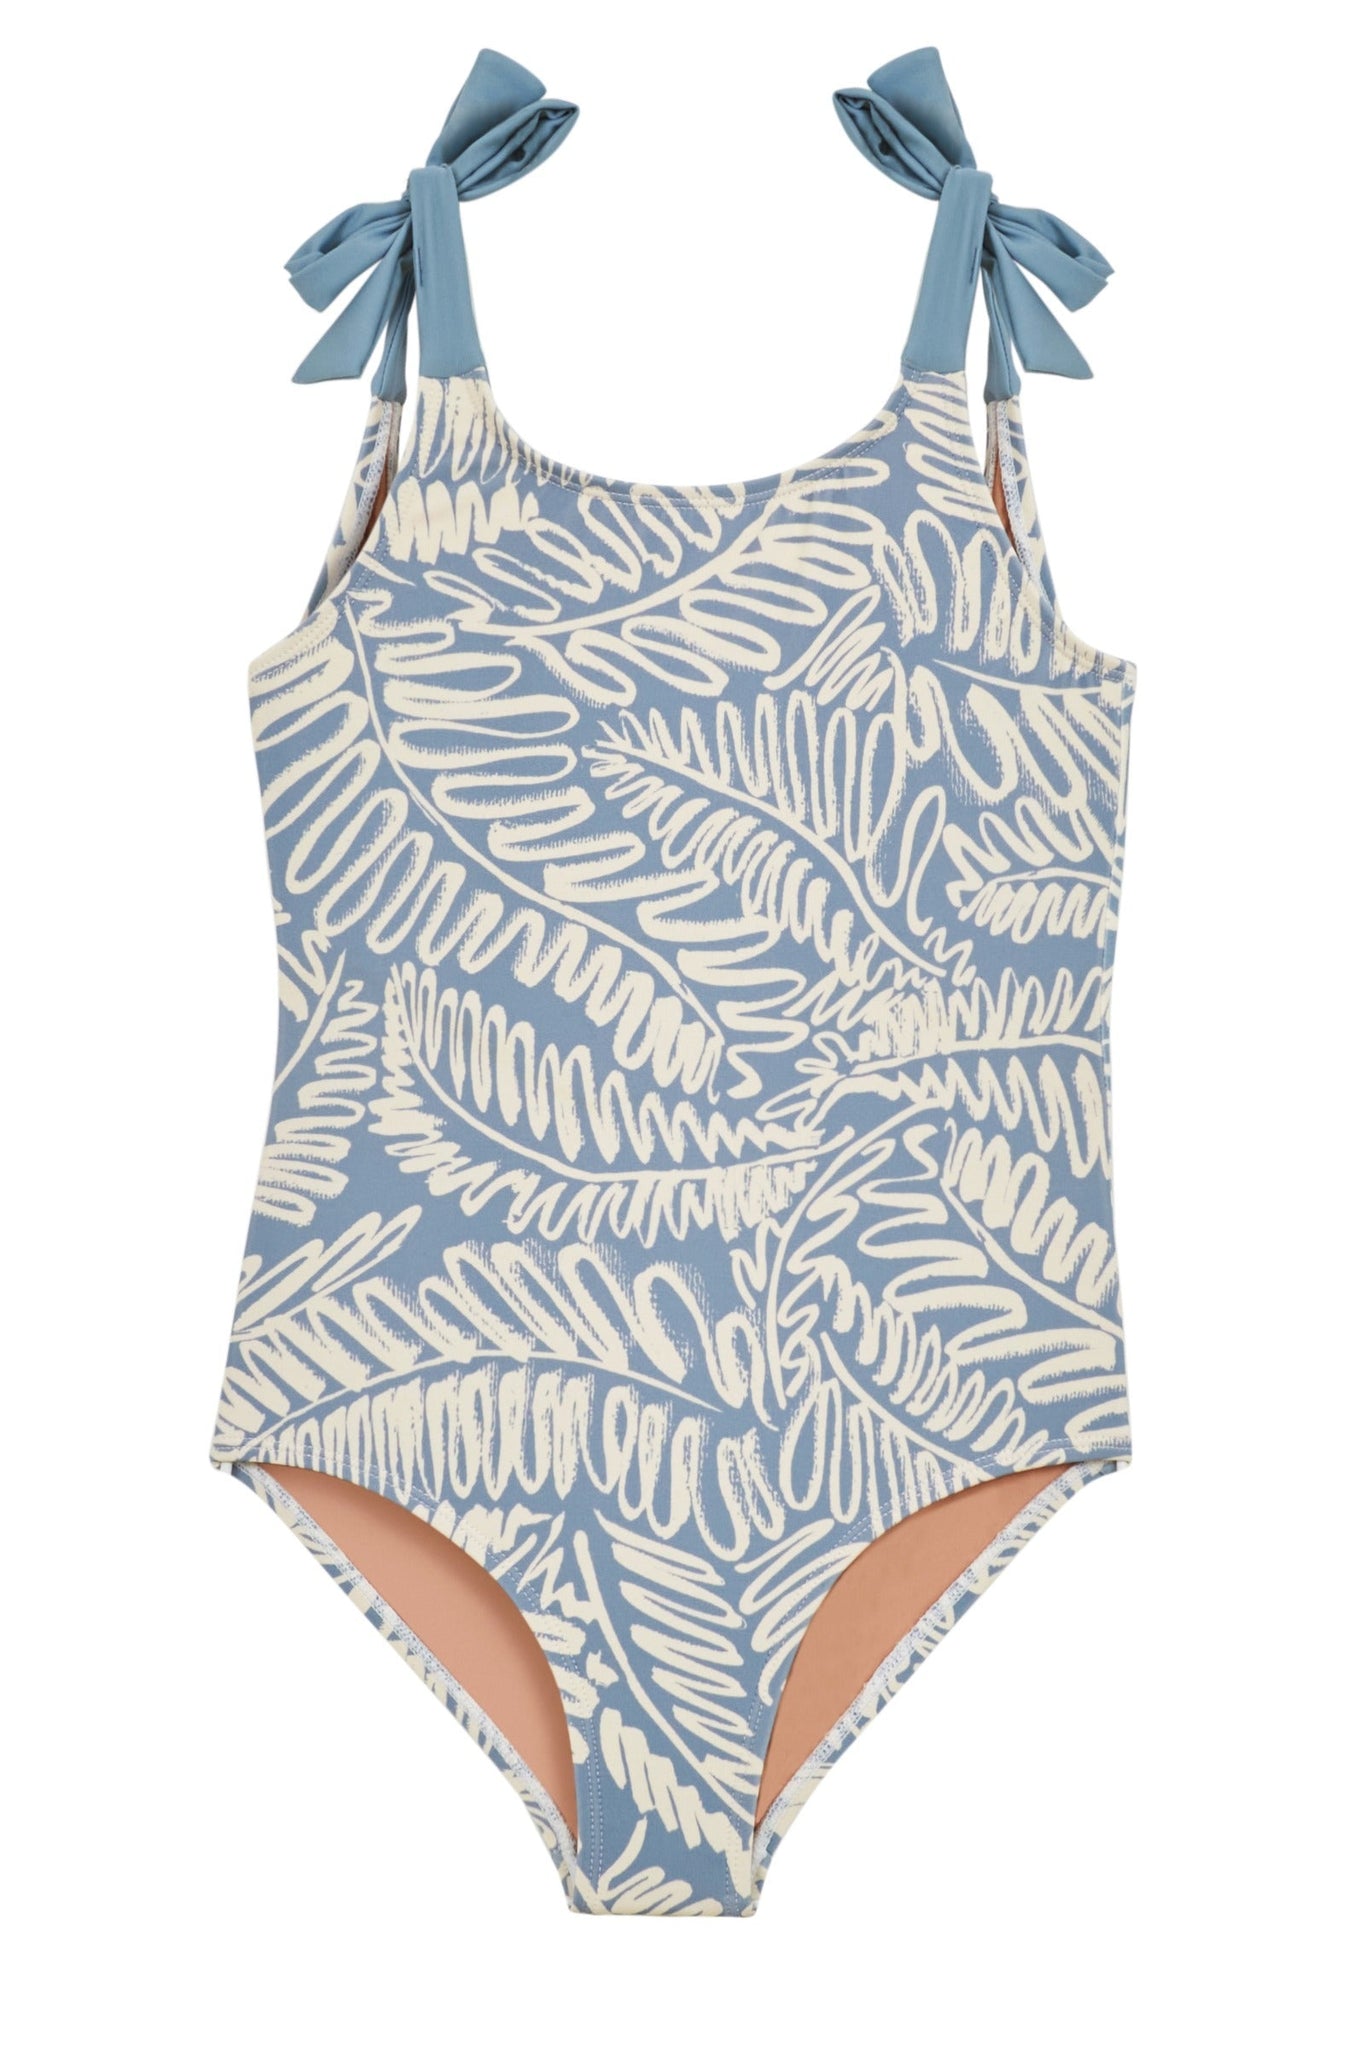 Little Britt One-Piece Swimsuit by Hermoza – Support Herstory